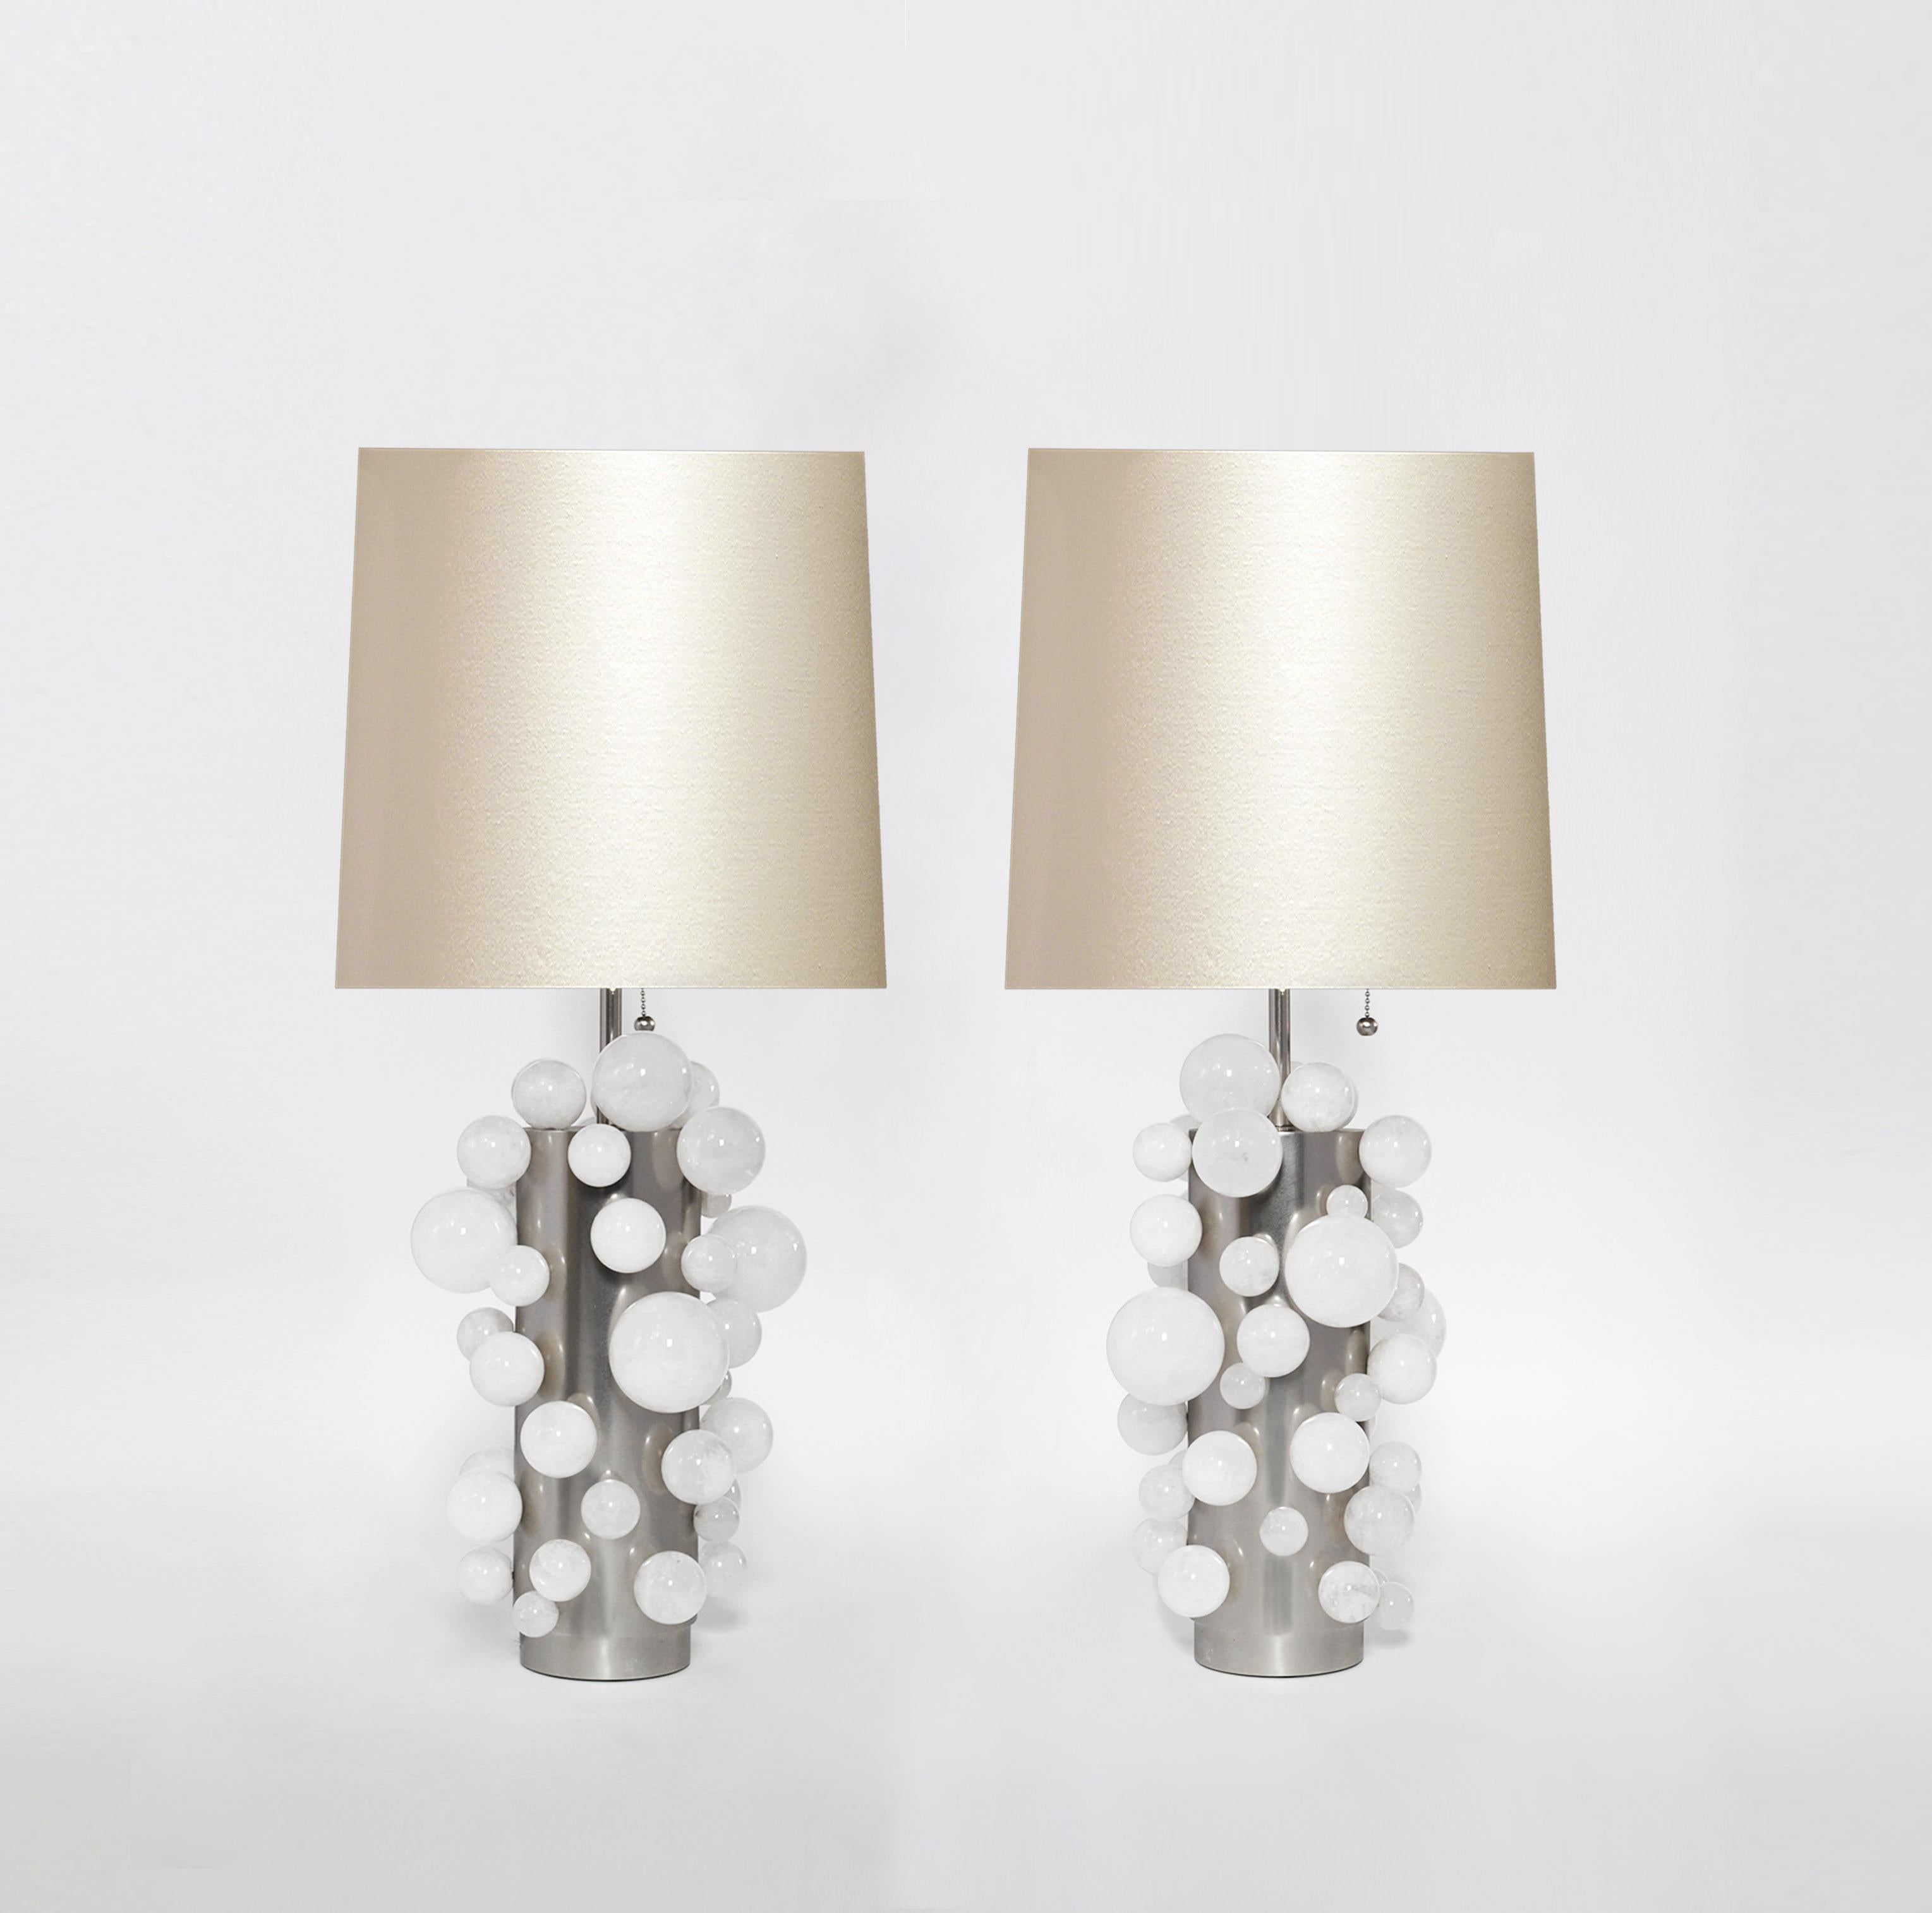 A pair of luxury white rock crystal quartz bulb lamps with matte nickel bases. Created by Phoenix Gallery, NYC.
To the top of the rock crystal 13.25 inch.
Lampshade not included.
